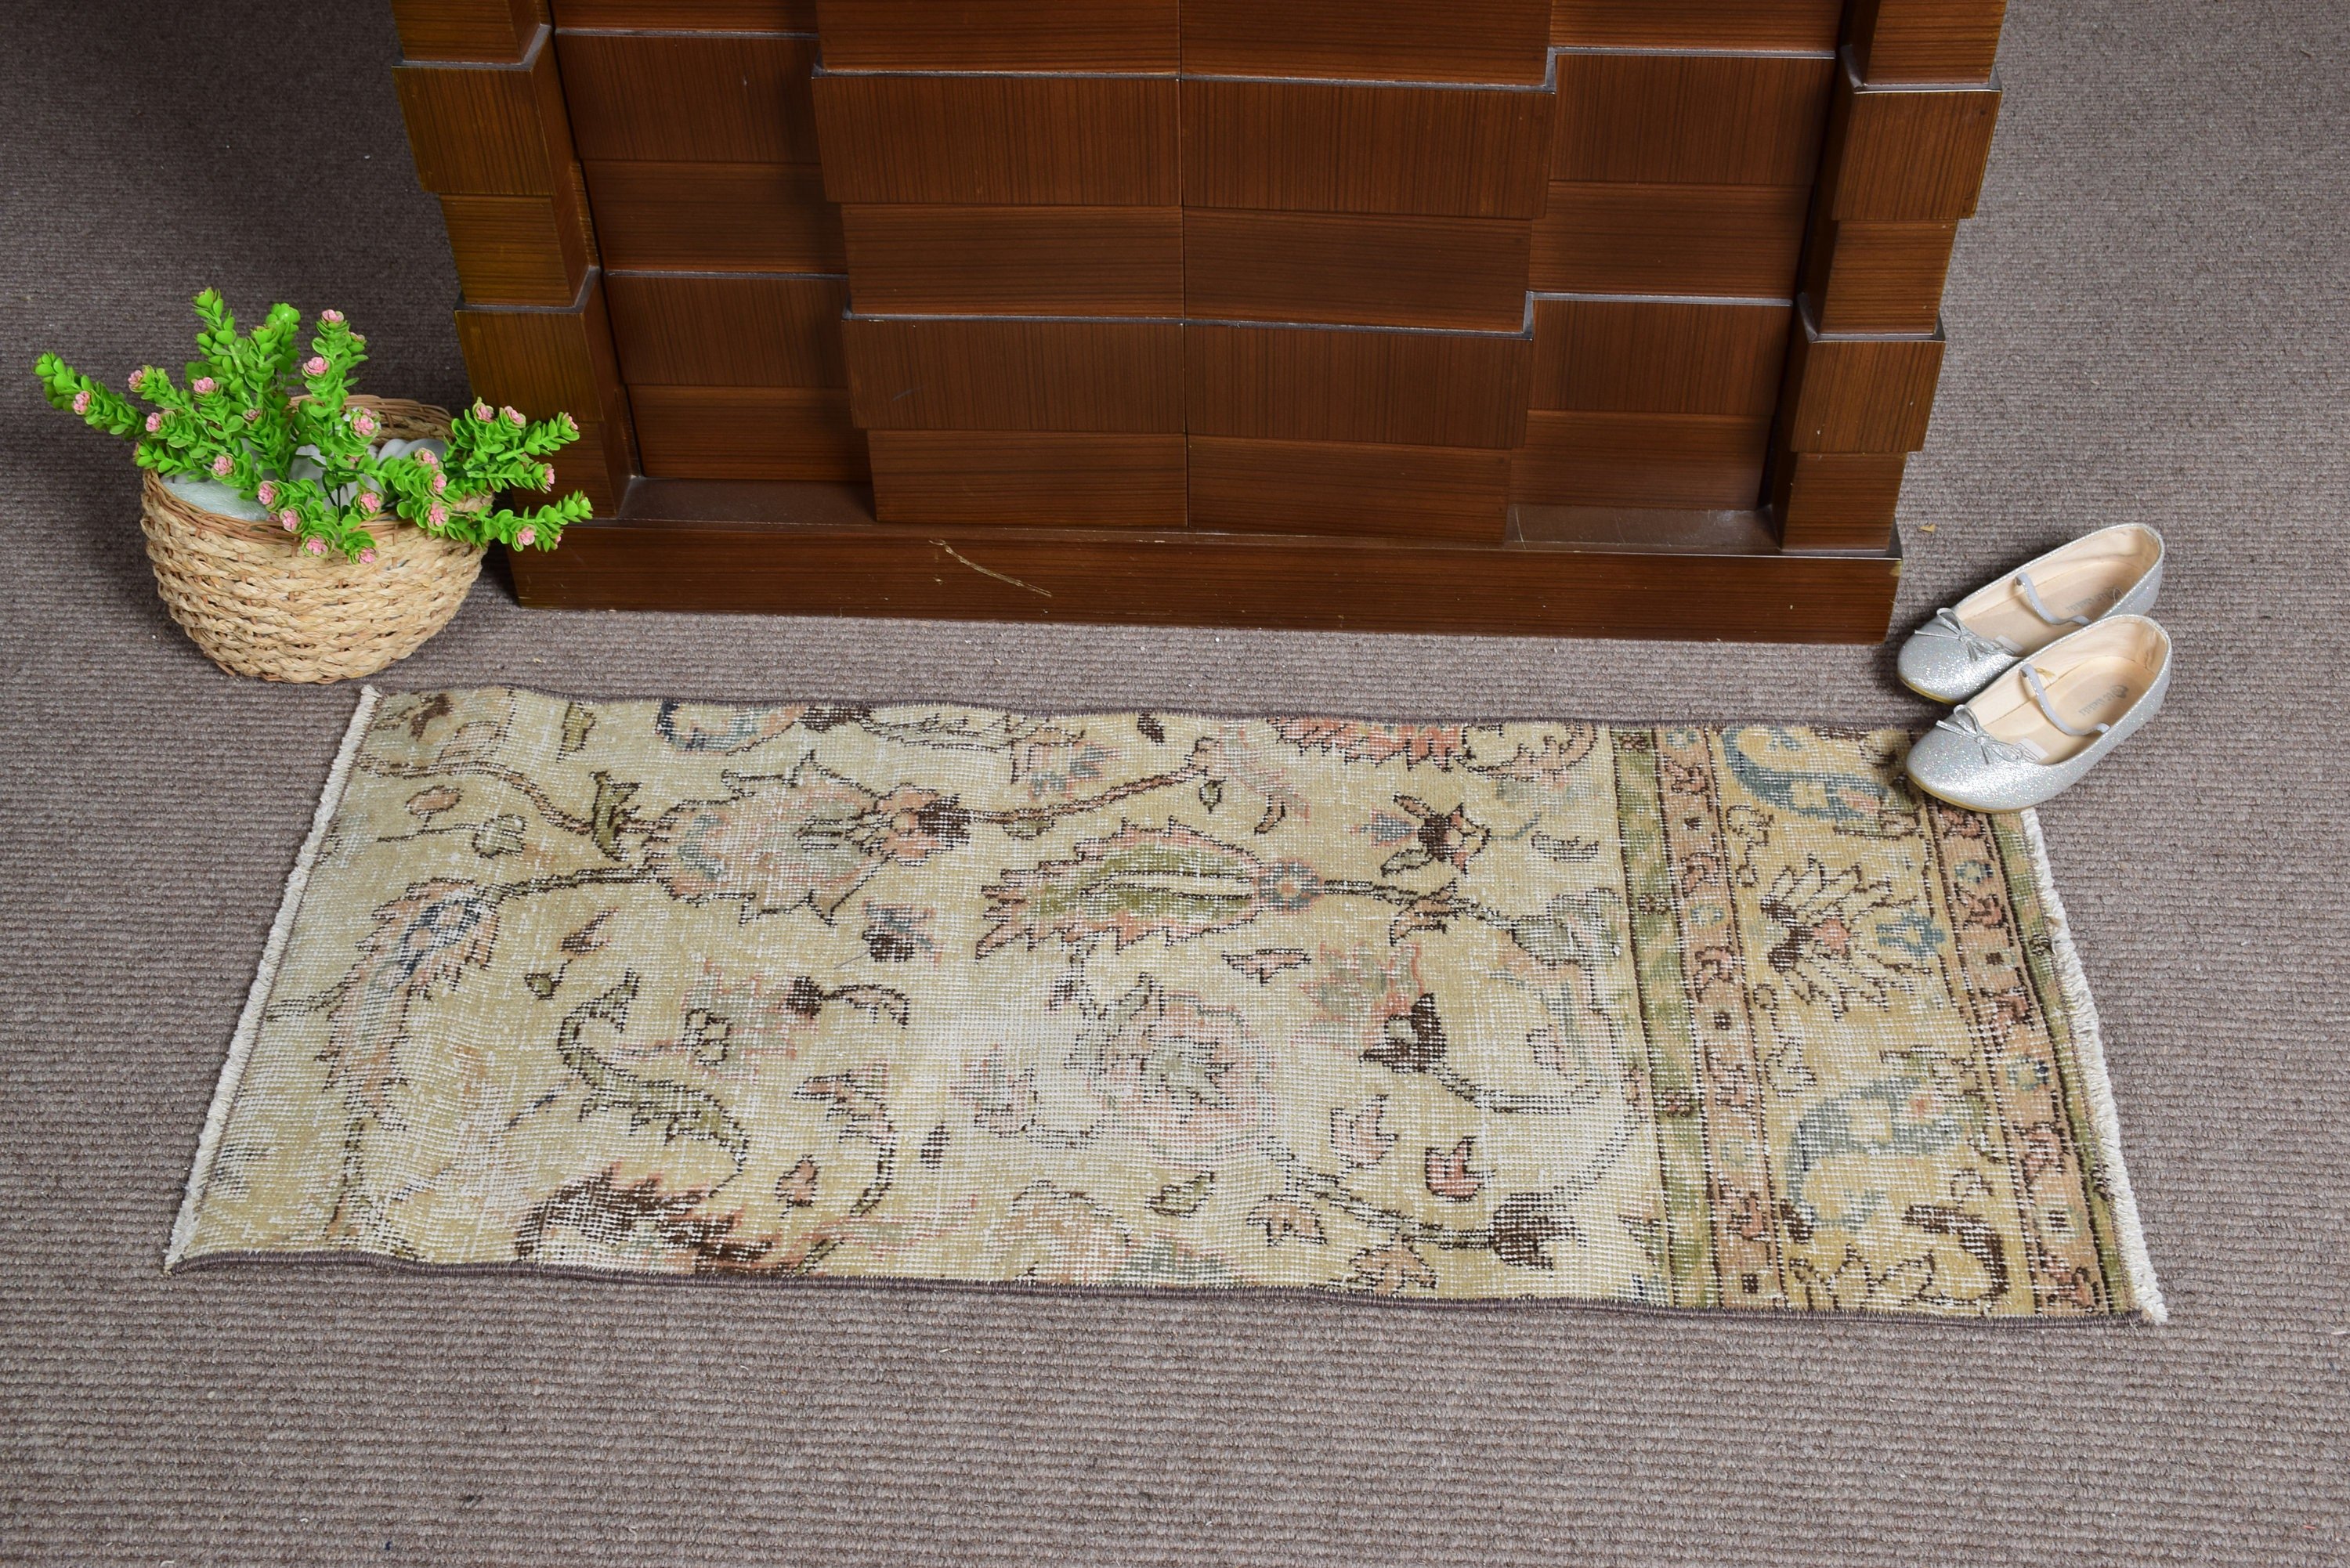 Cool Rugs, Entry Rug, Vintage Rug, Beige Floor Rug, Turkish Rugs, Home Decor Rug, Rugs for Car Mat, 1.6x3.7 ft Small Rug, Kitchen Rug